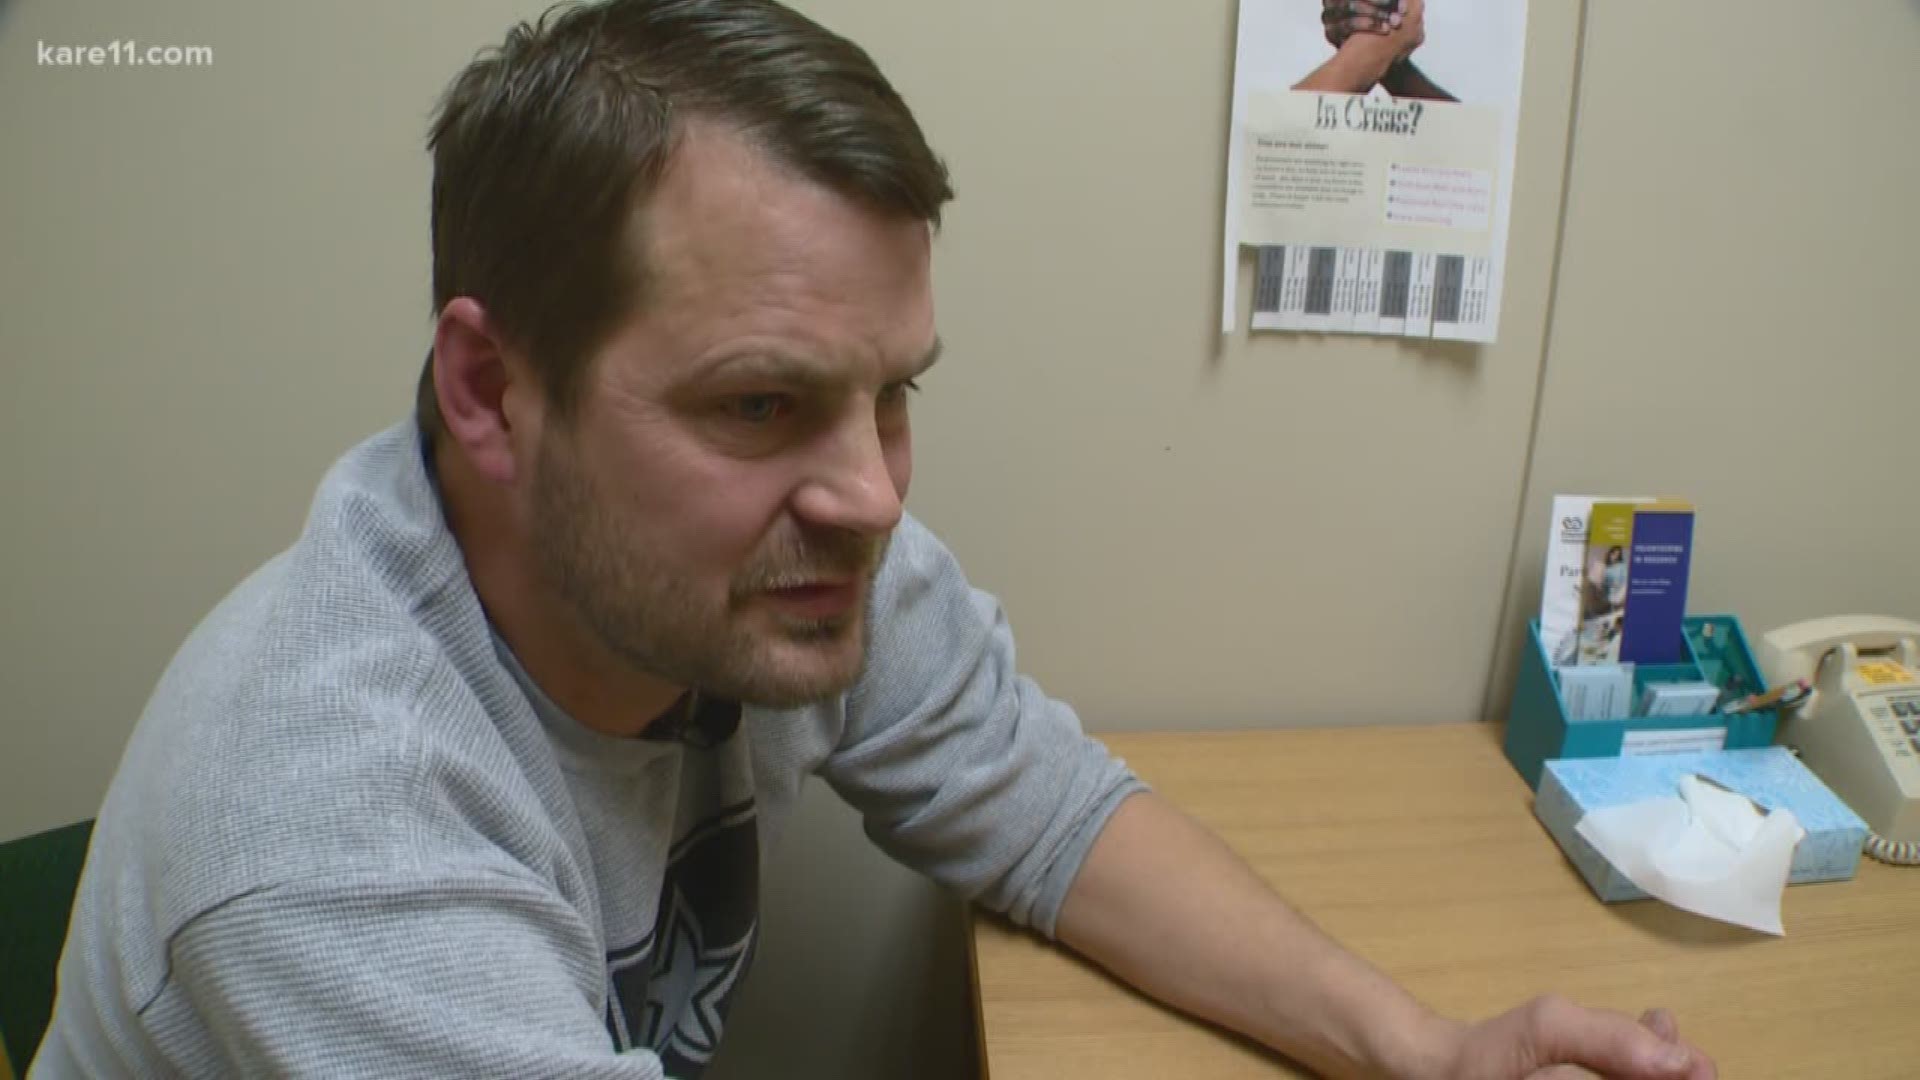 The University of MN and VA researchers are hoping to study more than 1000 Gulf War veterans to find a way to help the symptoms of Gulf War Syndrome and the resulting PTSD.